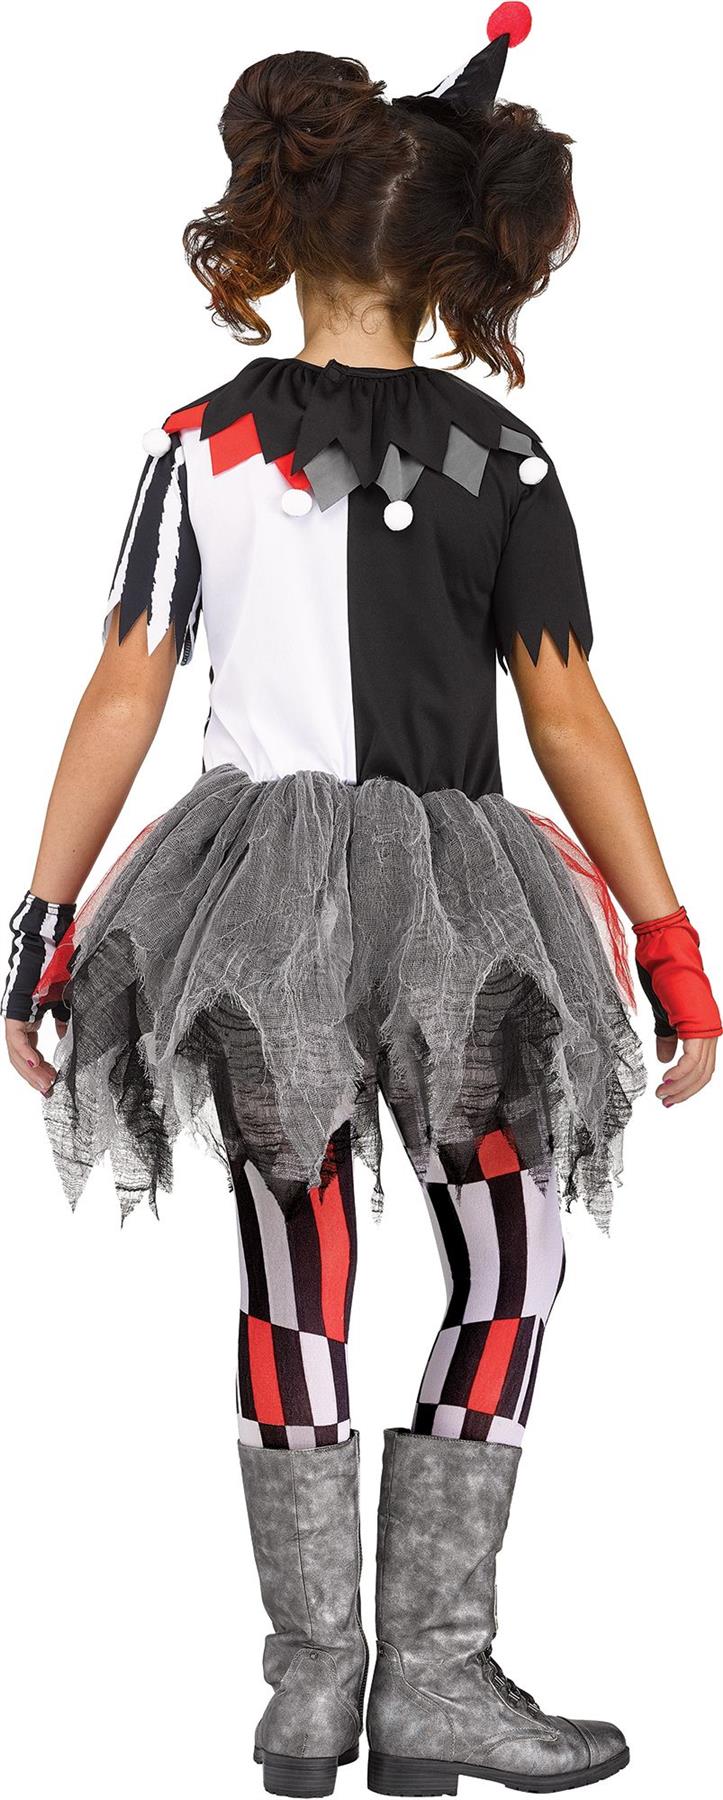 Fun World Sinister Circus Girl's Halloween Fancy-Dress Costume for Child, XL - image 2 of 3